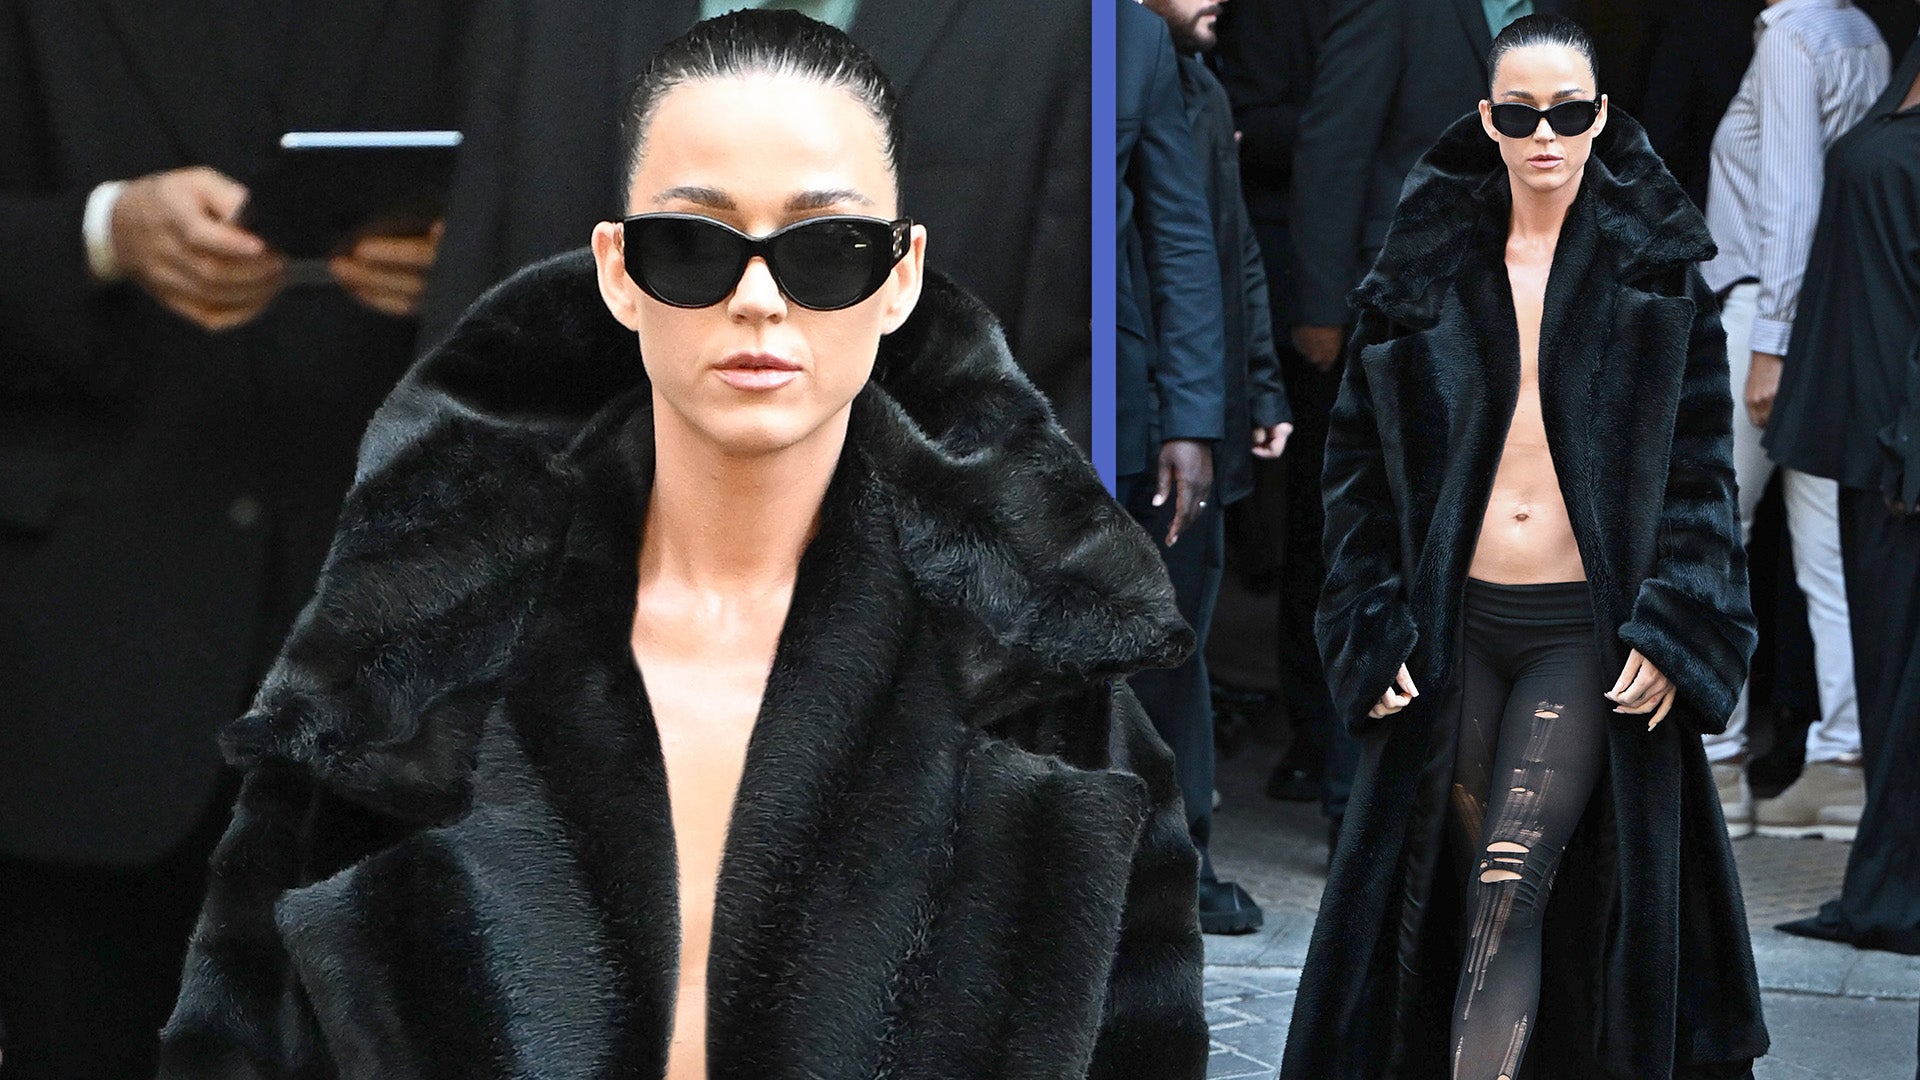 Katy Perry Wears Only a Fur Coat and Tights to Paris Fashion Week Show